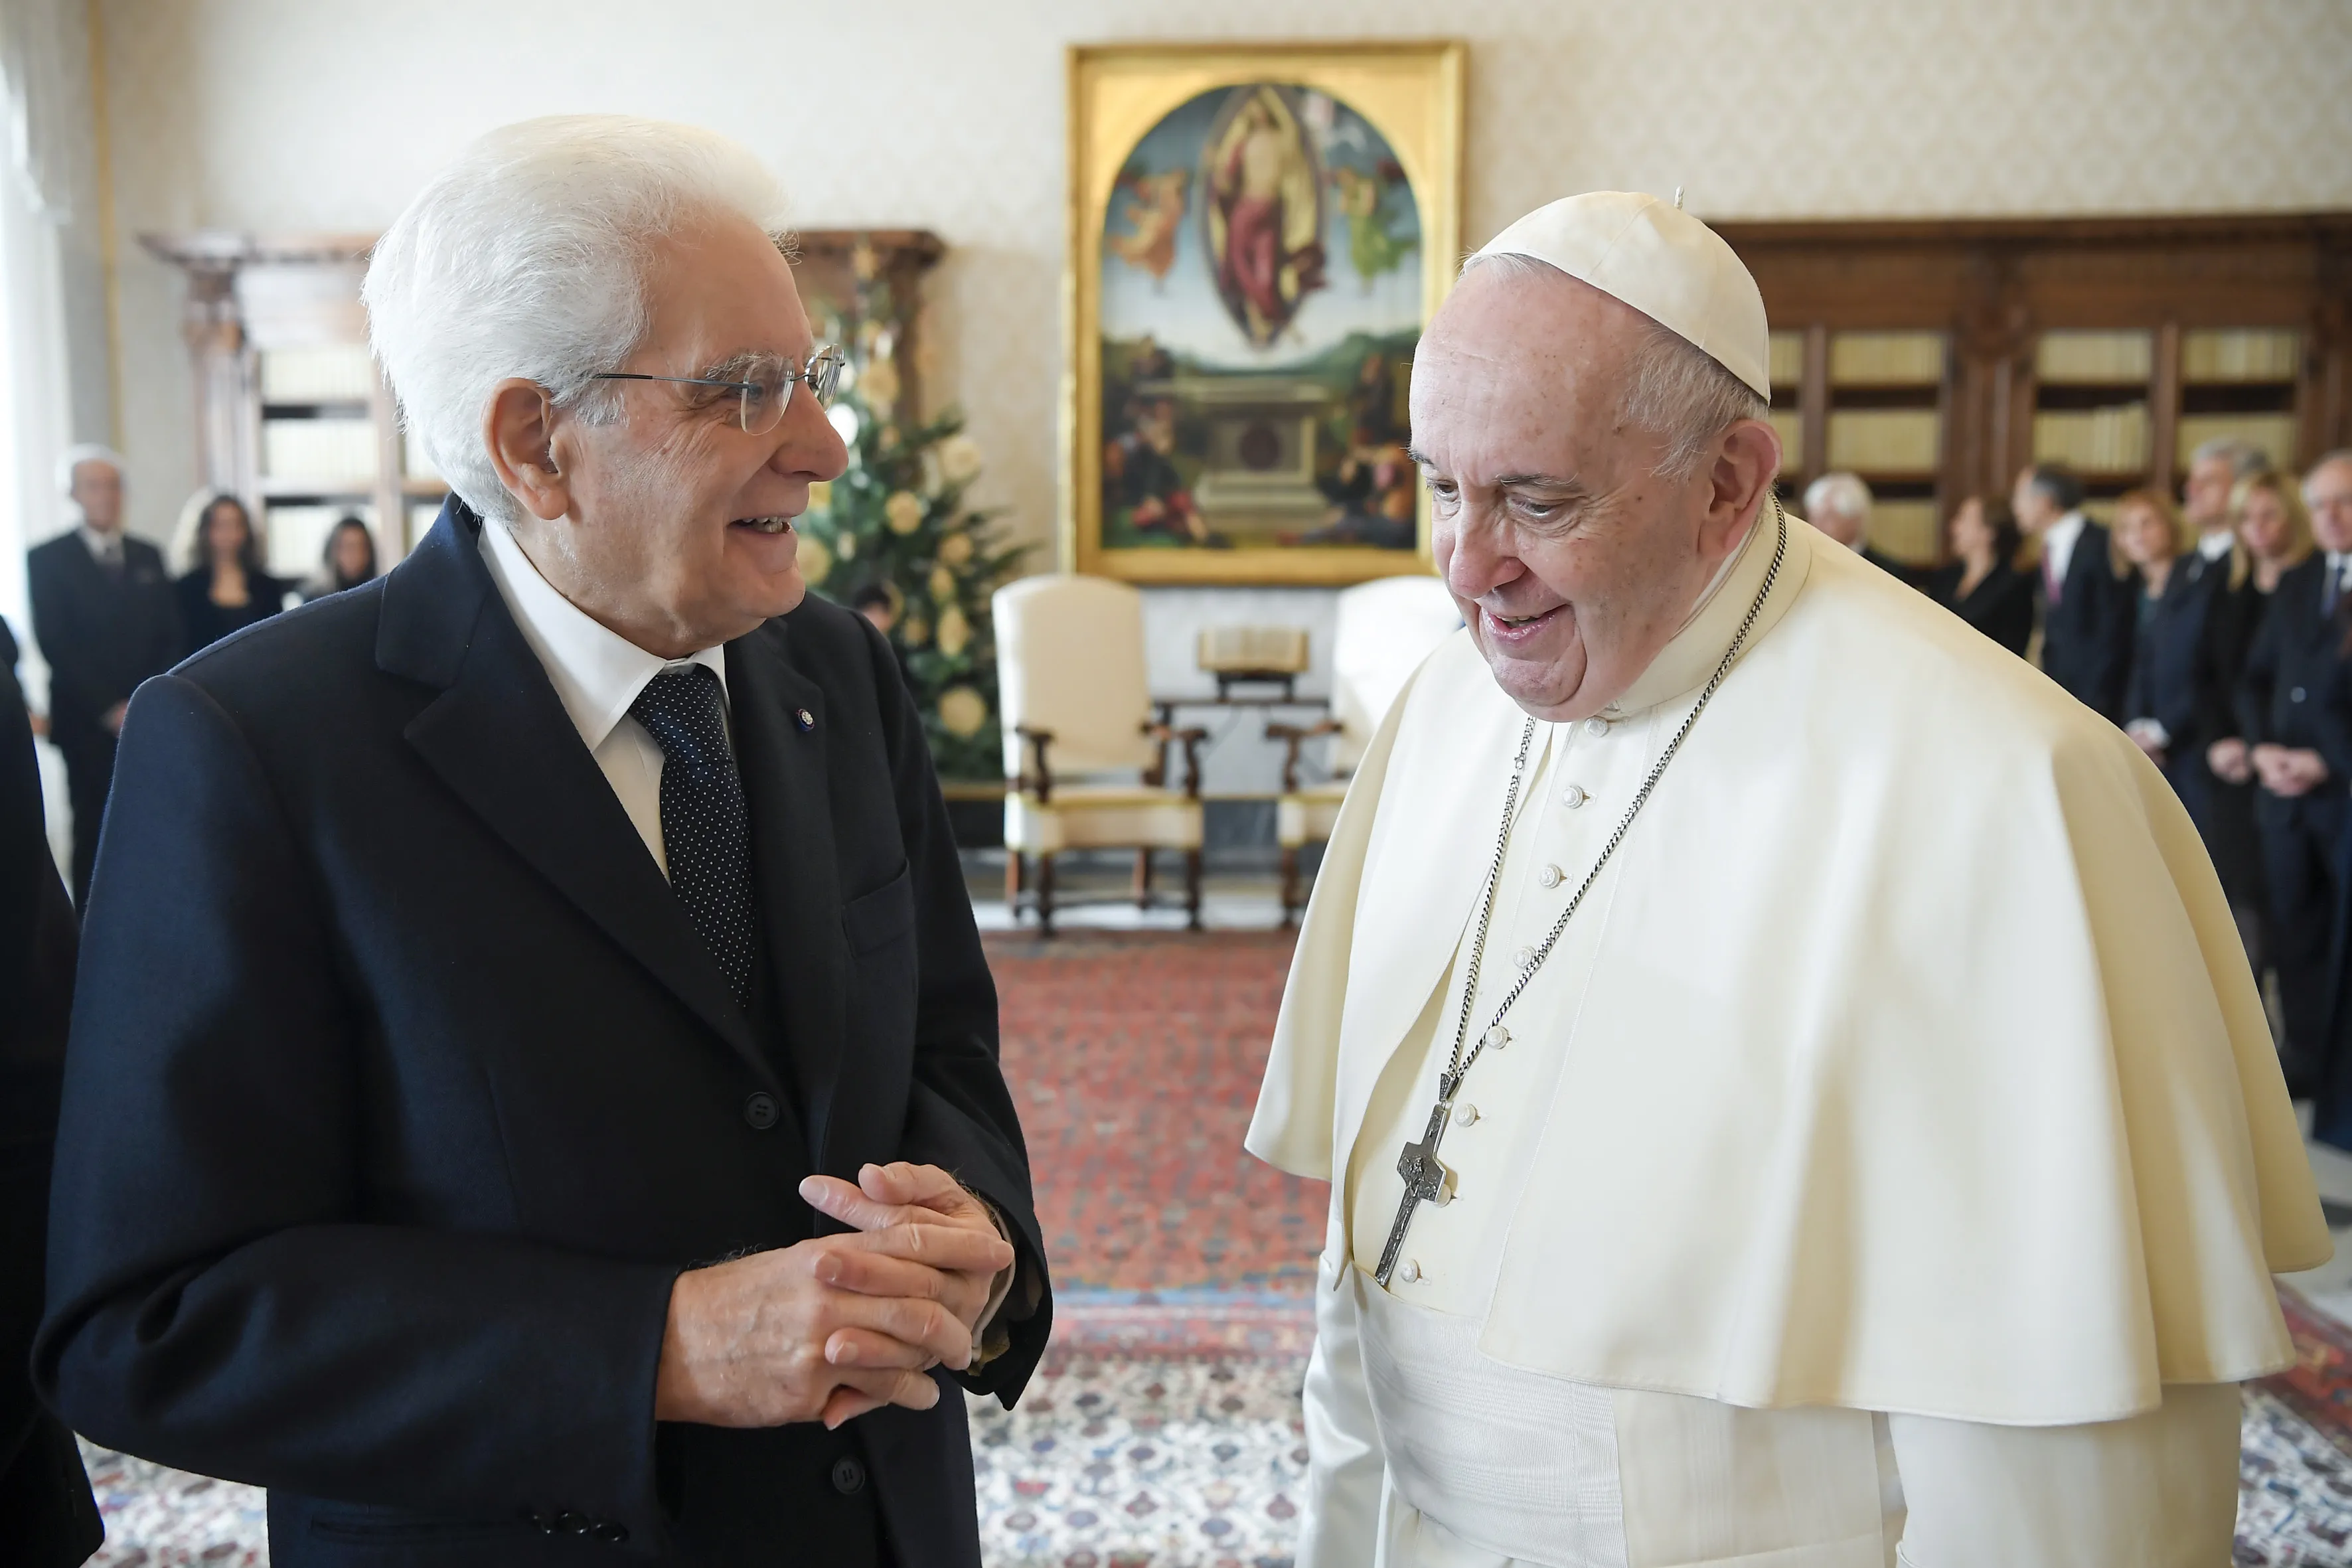 Pope Francis received an audience with President Mattarella on Dec. 16, 2021. Vatican Media